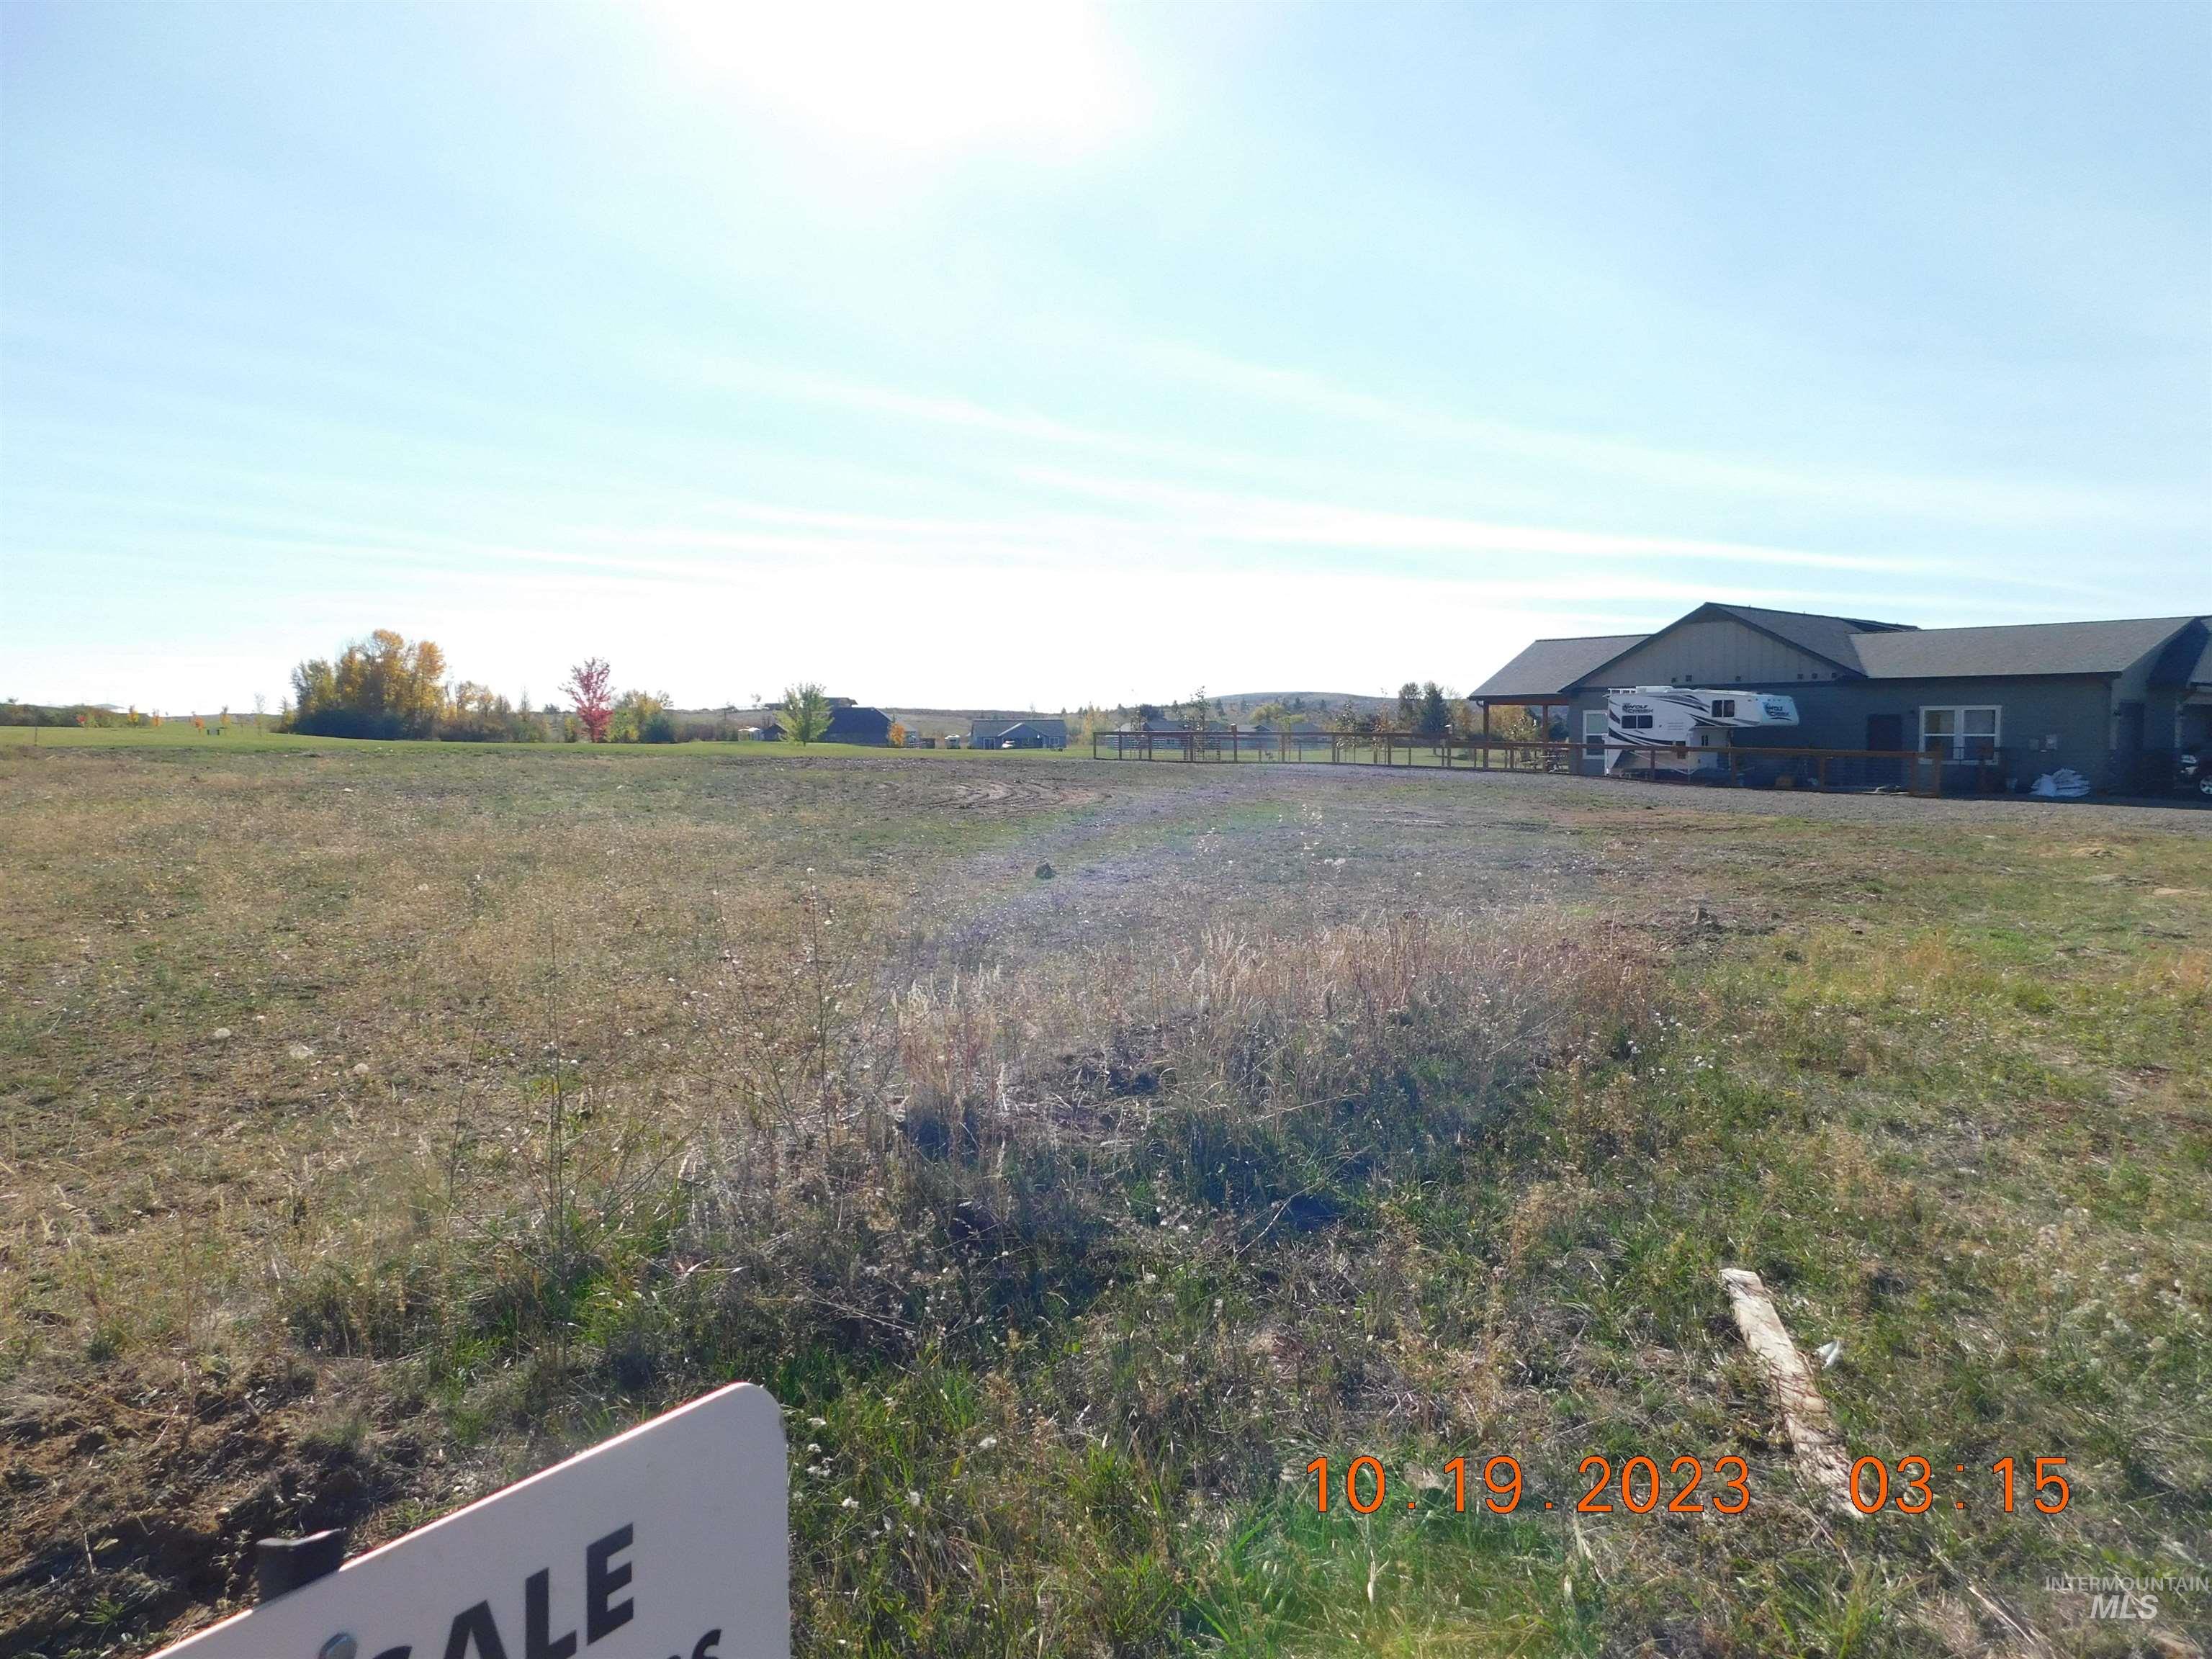 51 Fairway, Council, Idaho 83612, Land For Sale, Price $50,000,MLS 98891302